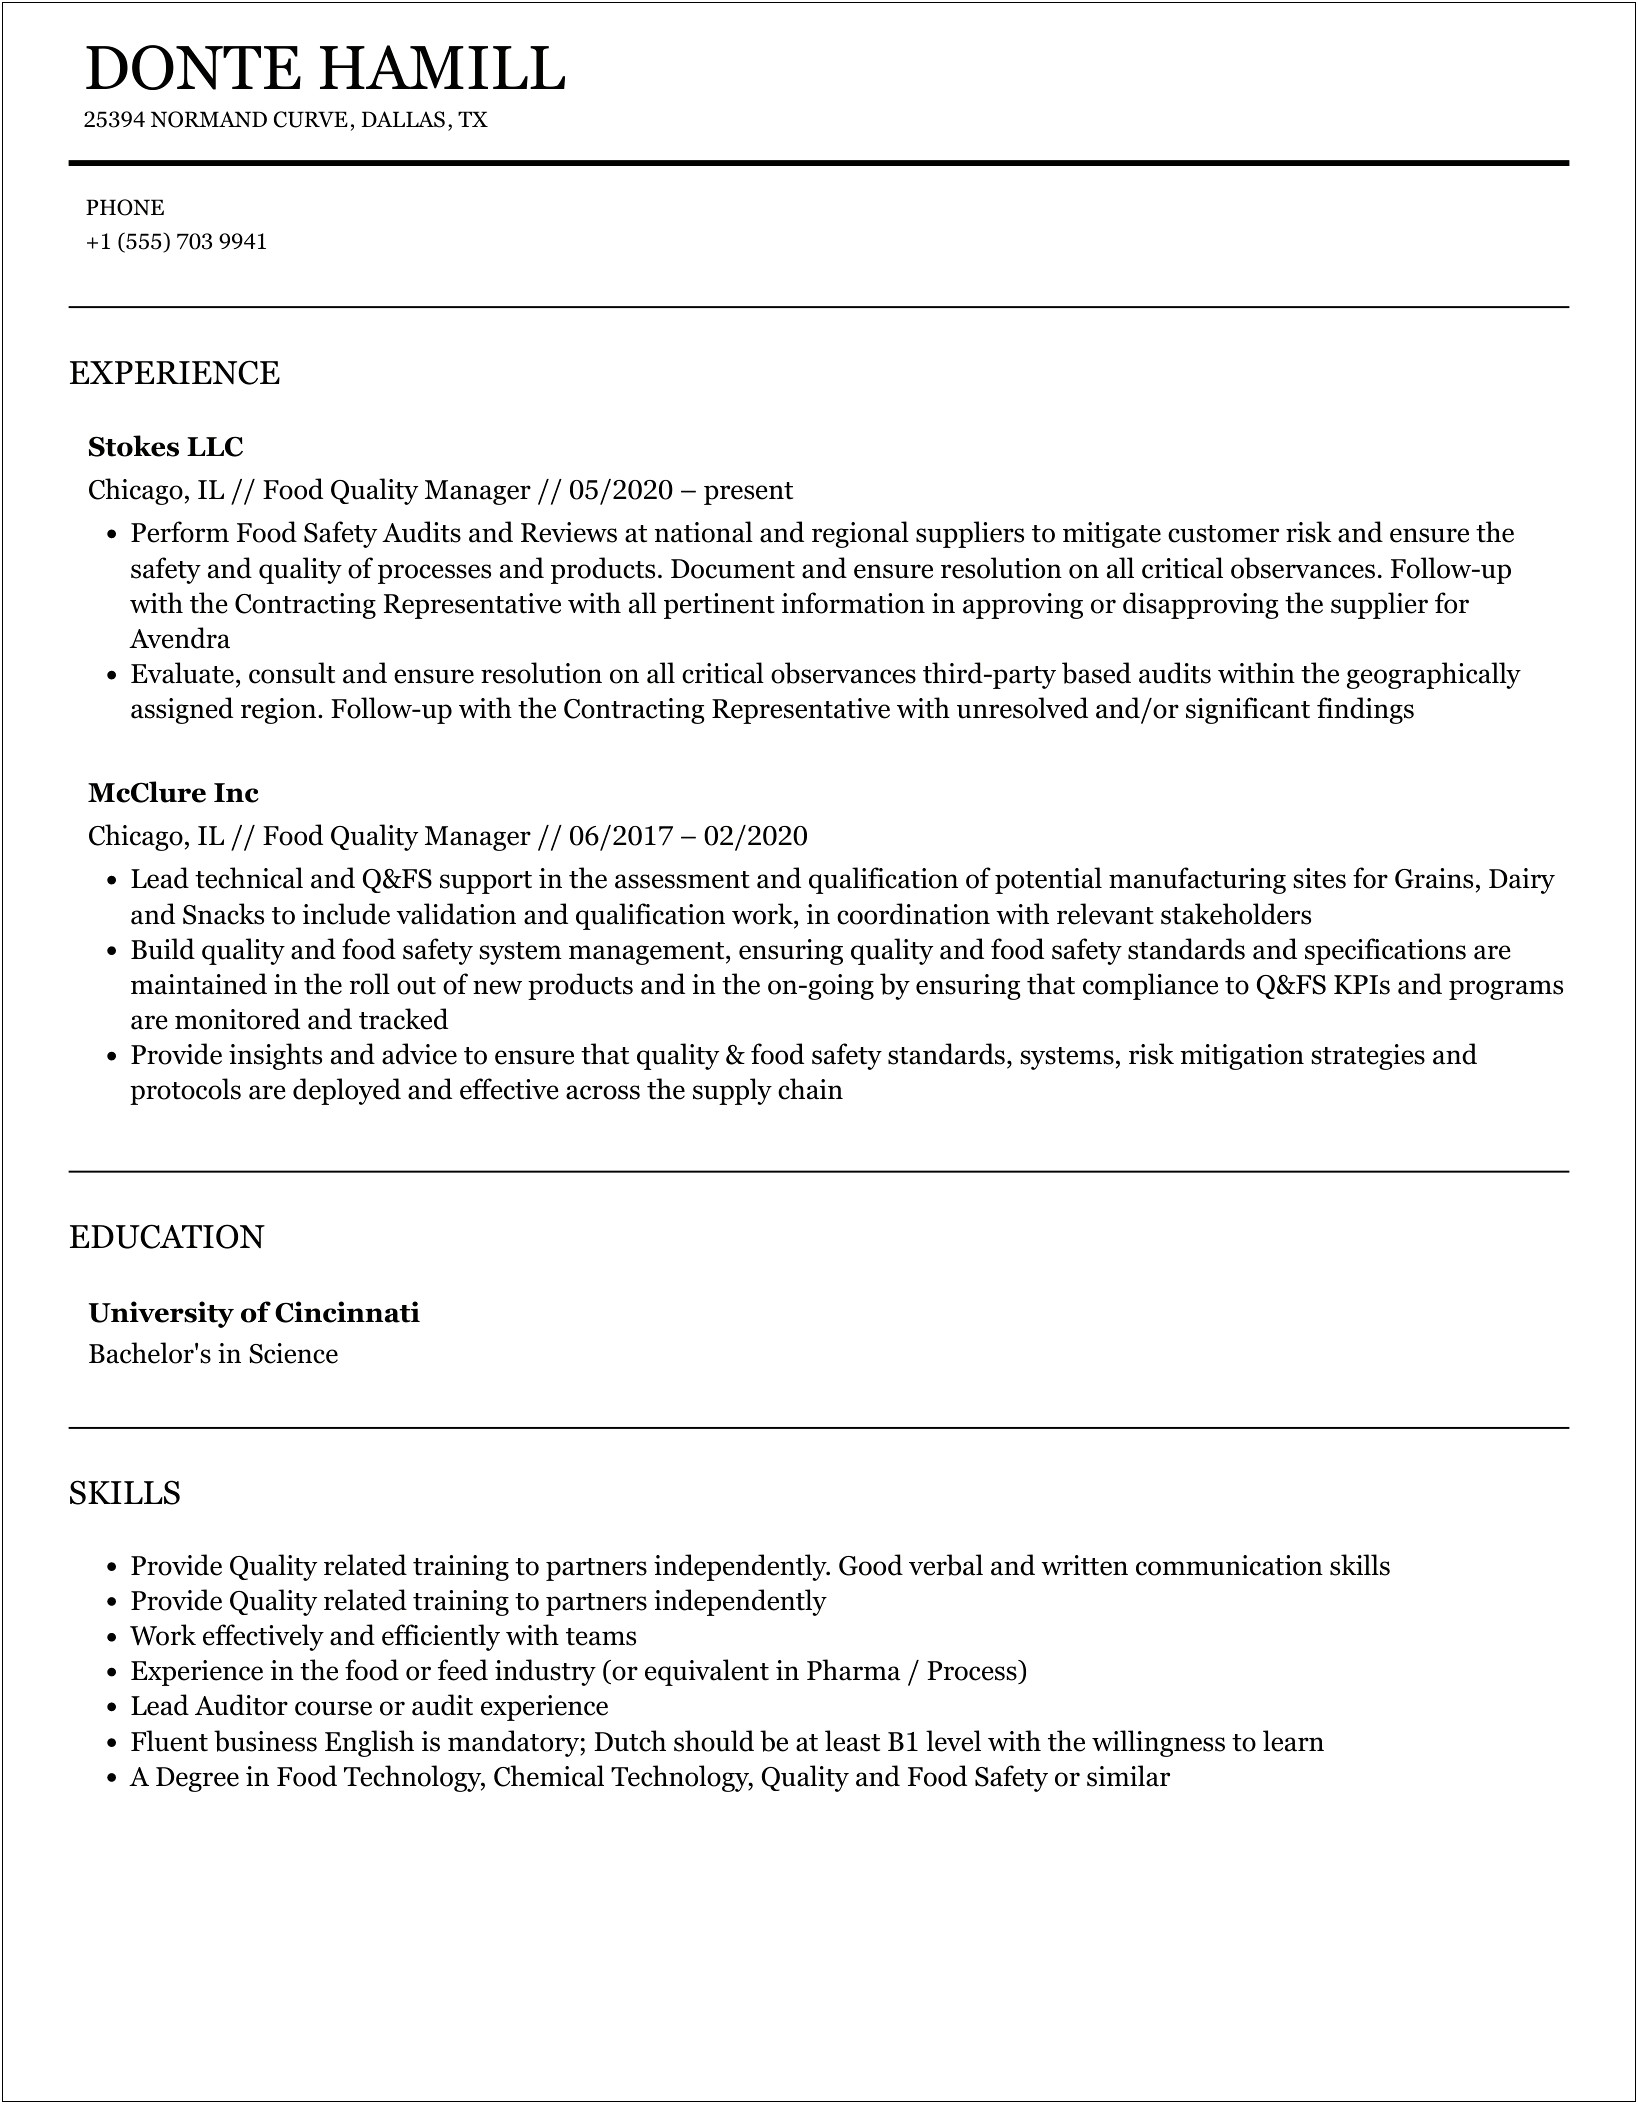 Restaurant Owner To Food Quality Manager Position Resume